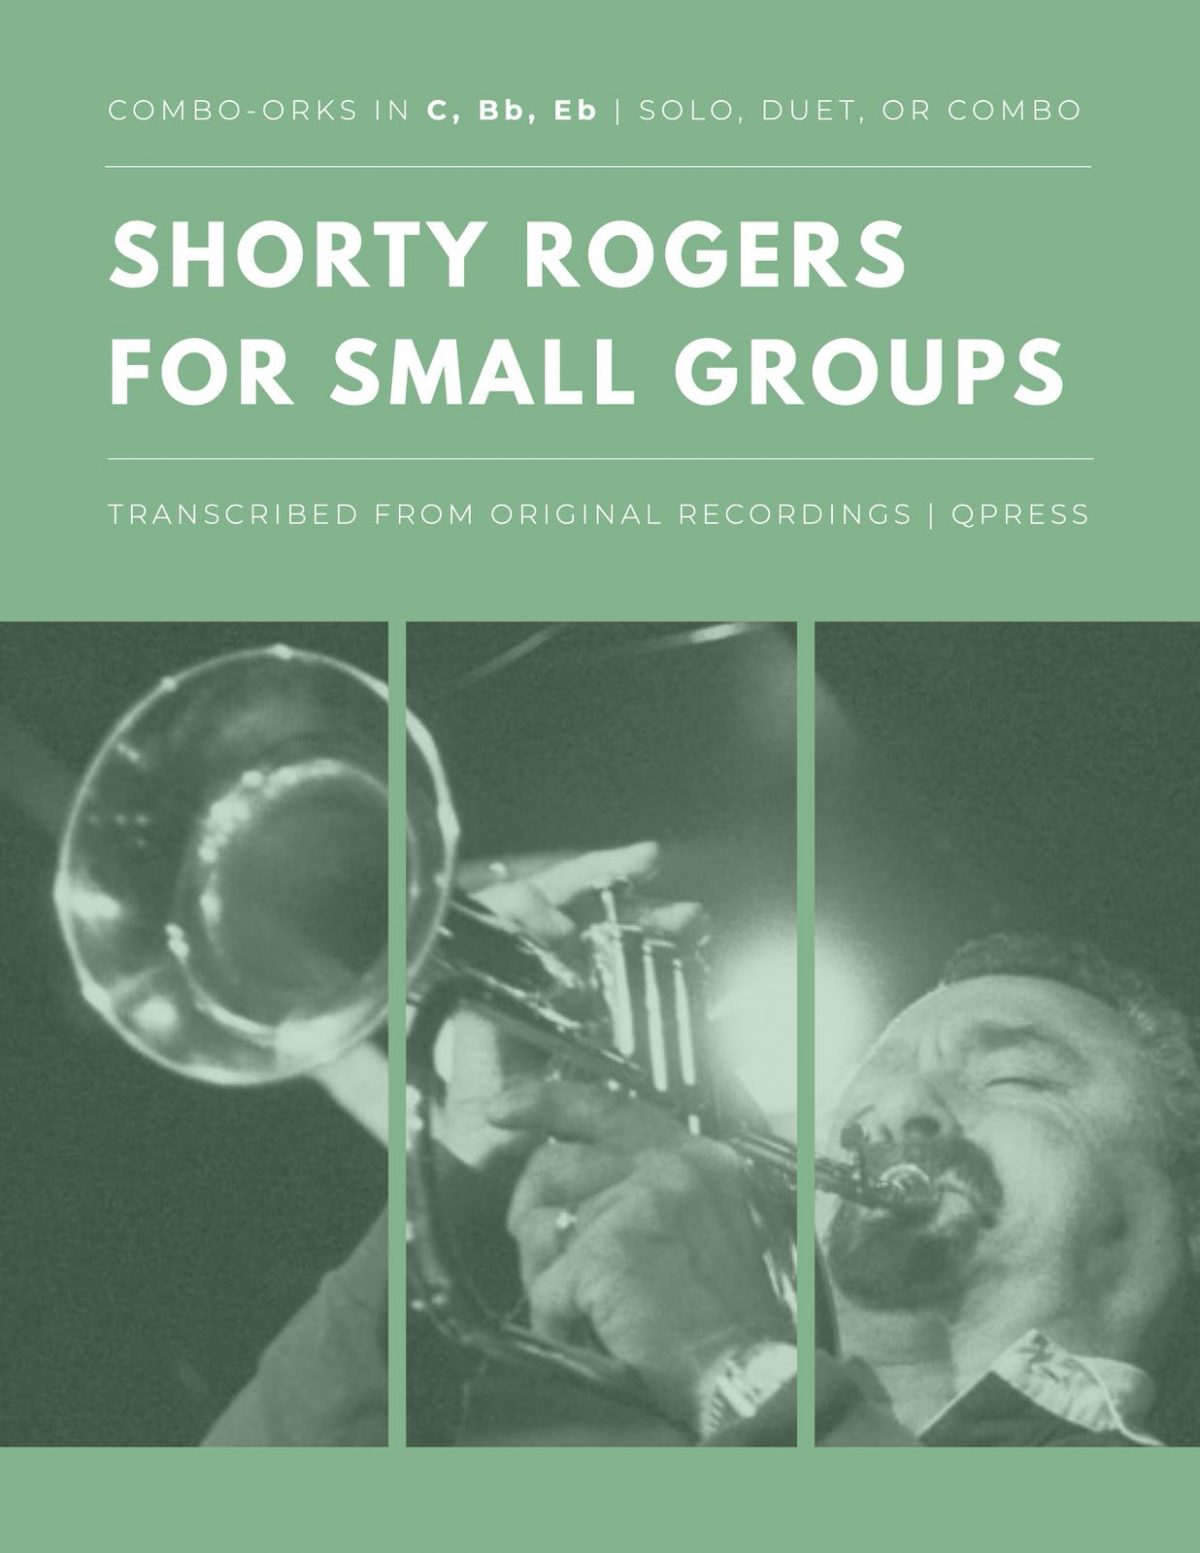 Rogers, For Small Groups (Combo-Orks)-p01